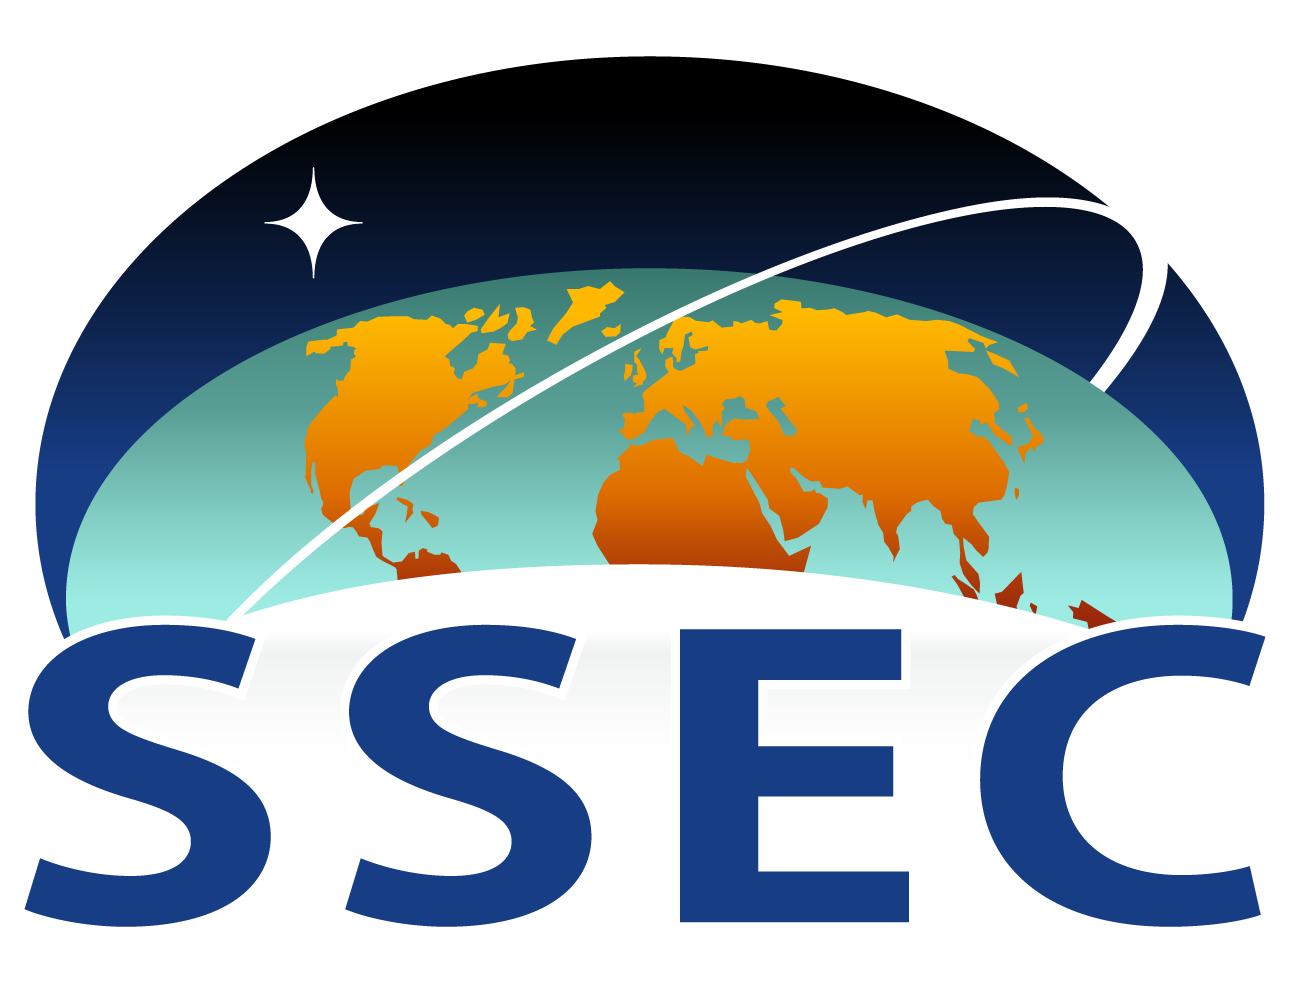 University of Wisconsin-Madison's Space Science and Engineering Center (SSEC)'s logo